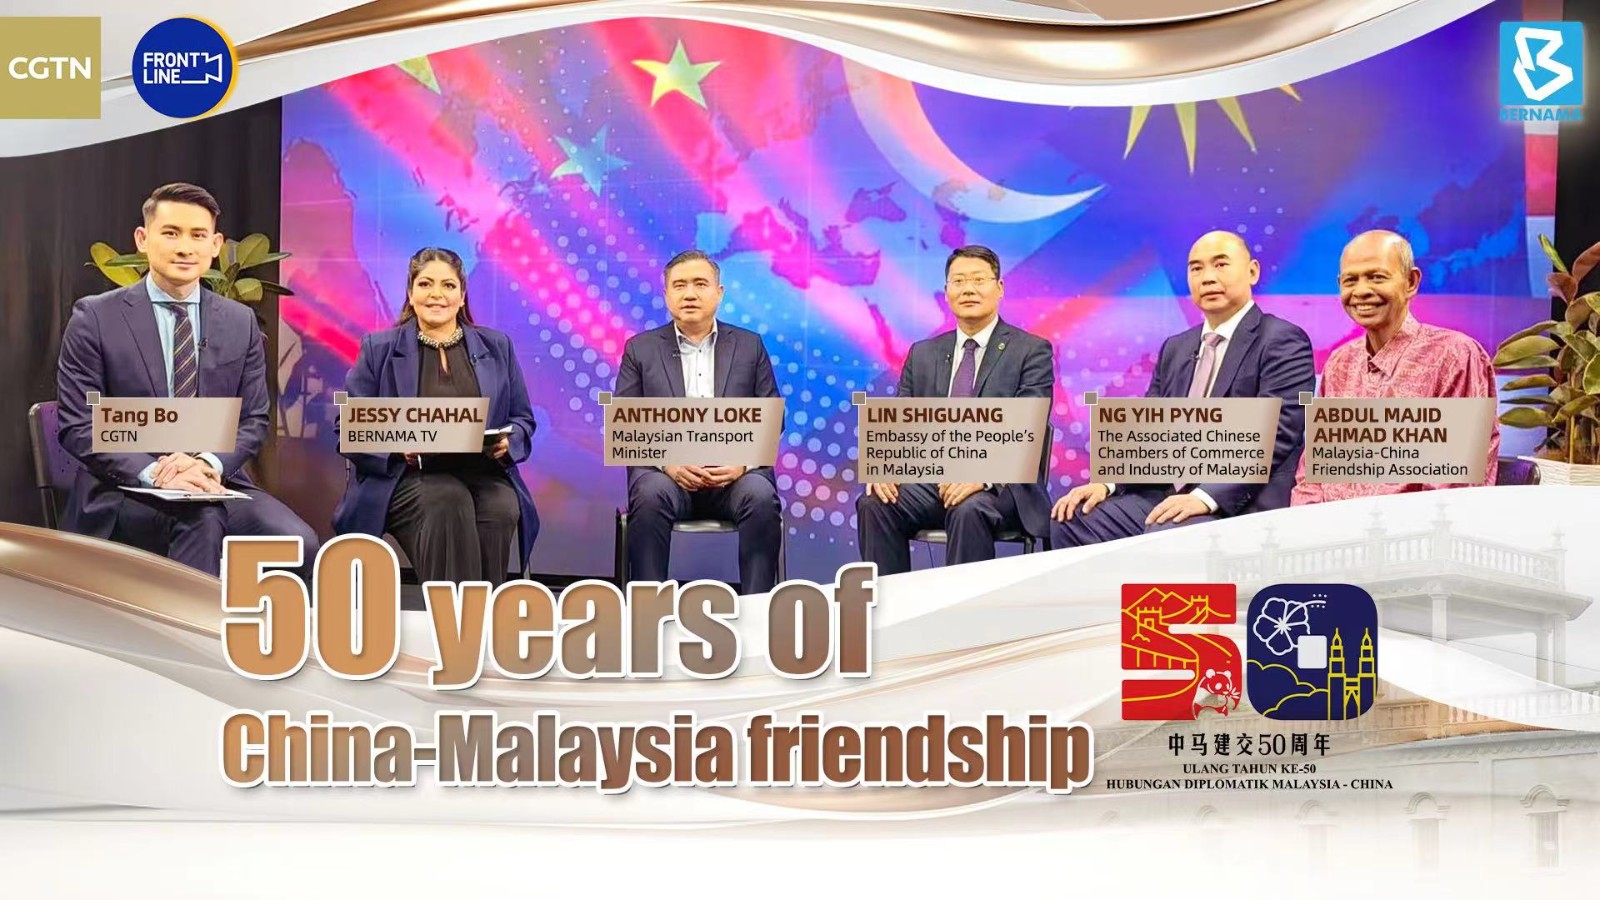 Watch: Stronger bonds, greater progress – Roundtable marks 50 years of China-Malaysia ties